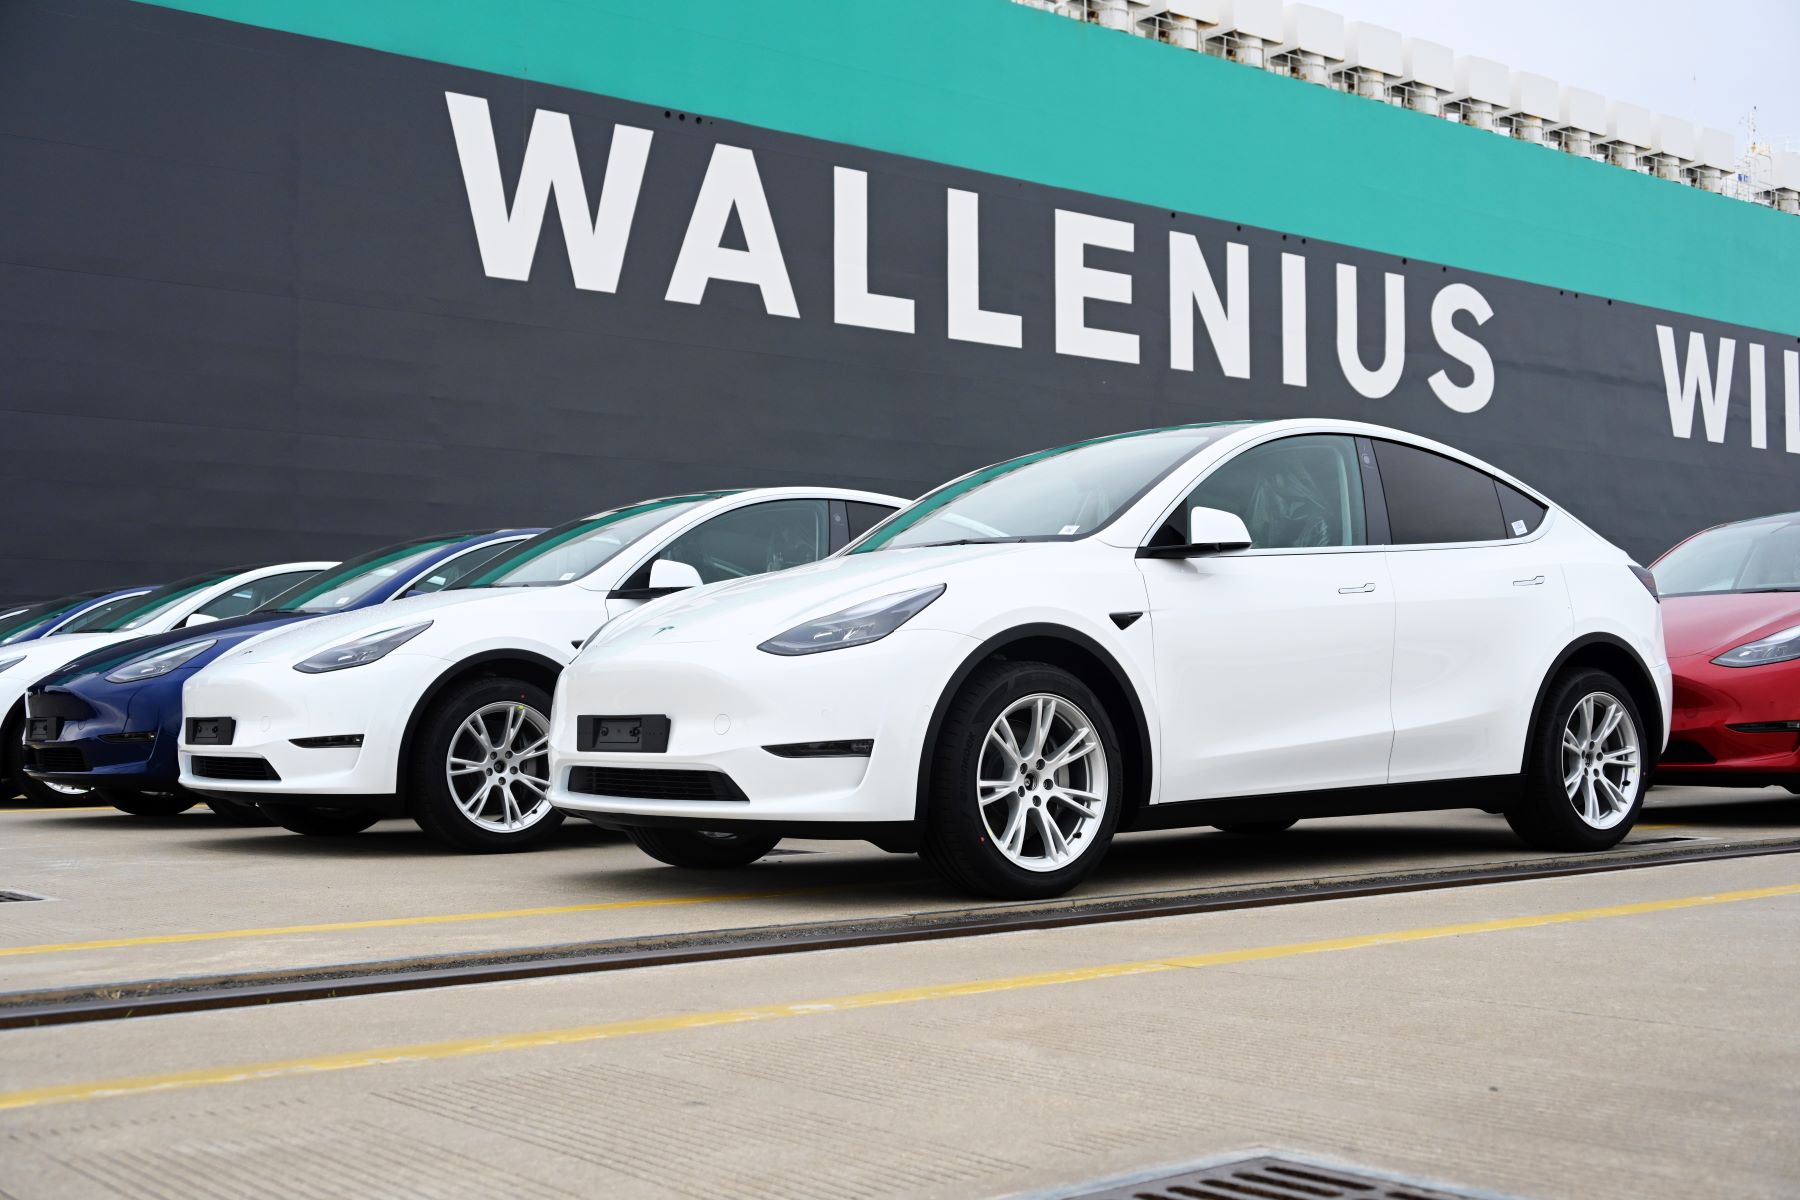 Tesla Model Y models in Shanghai, China, being shipped to the Port of Zeebrugge in Belgium using the Theben cargo vessel